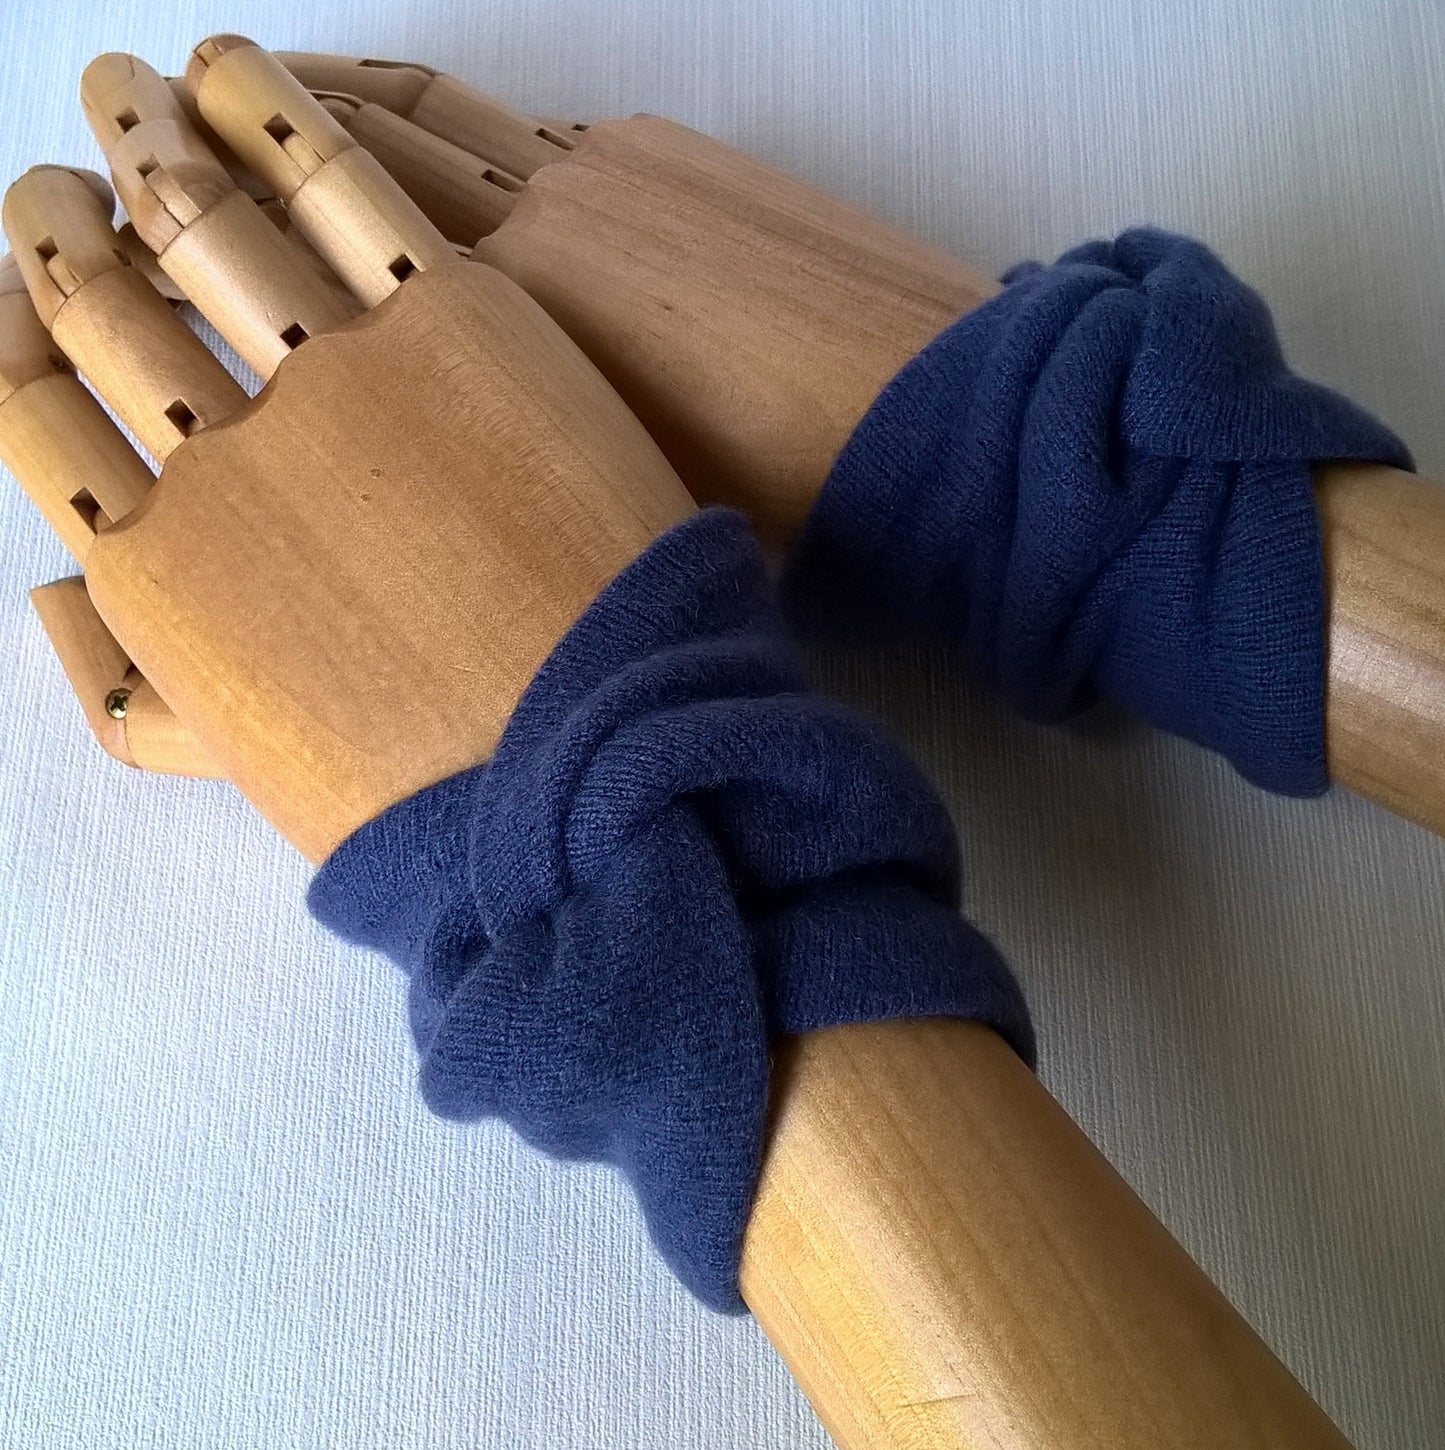 Handmade cashmere wrist warmers cover the pulse points to raise body temperature, leaving the hands free for performing tasks